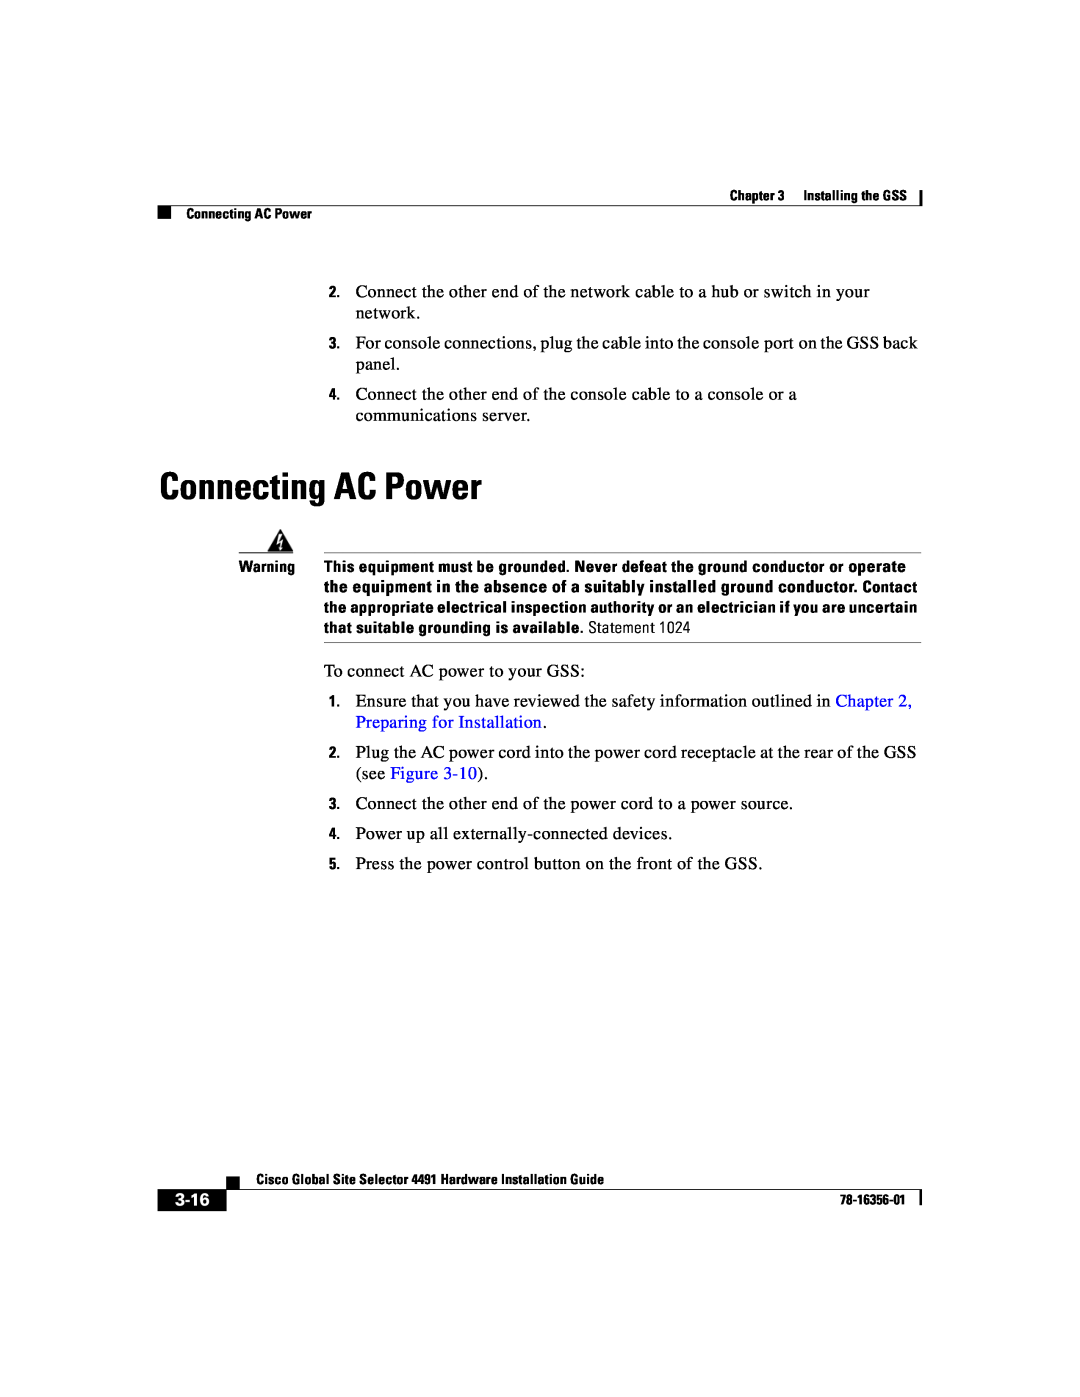 Cisco Systems 78-16356-01 manual Connecting AC Power, 3-16 